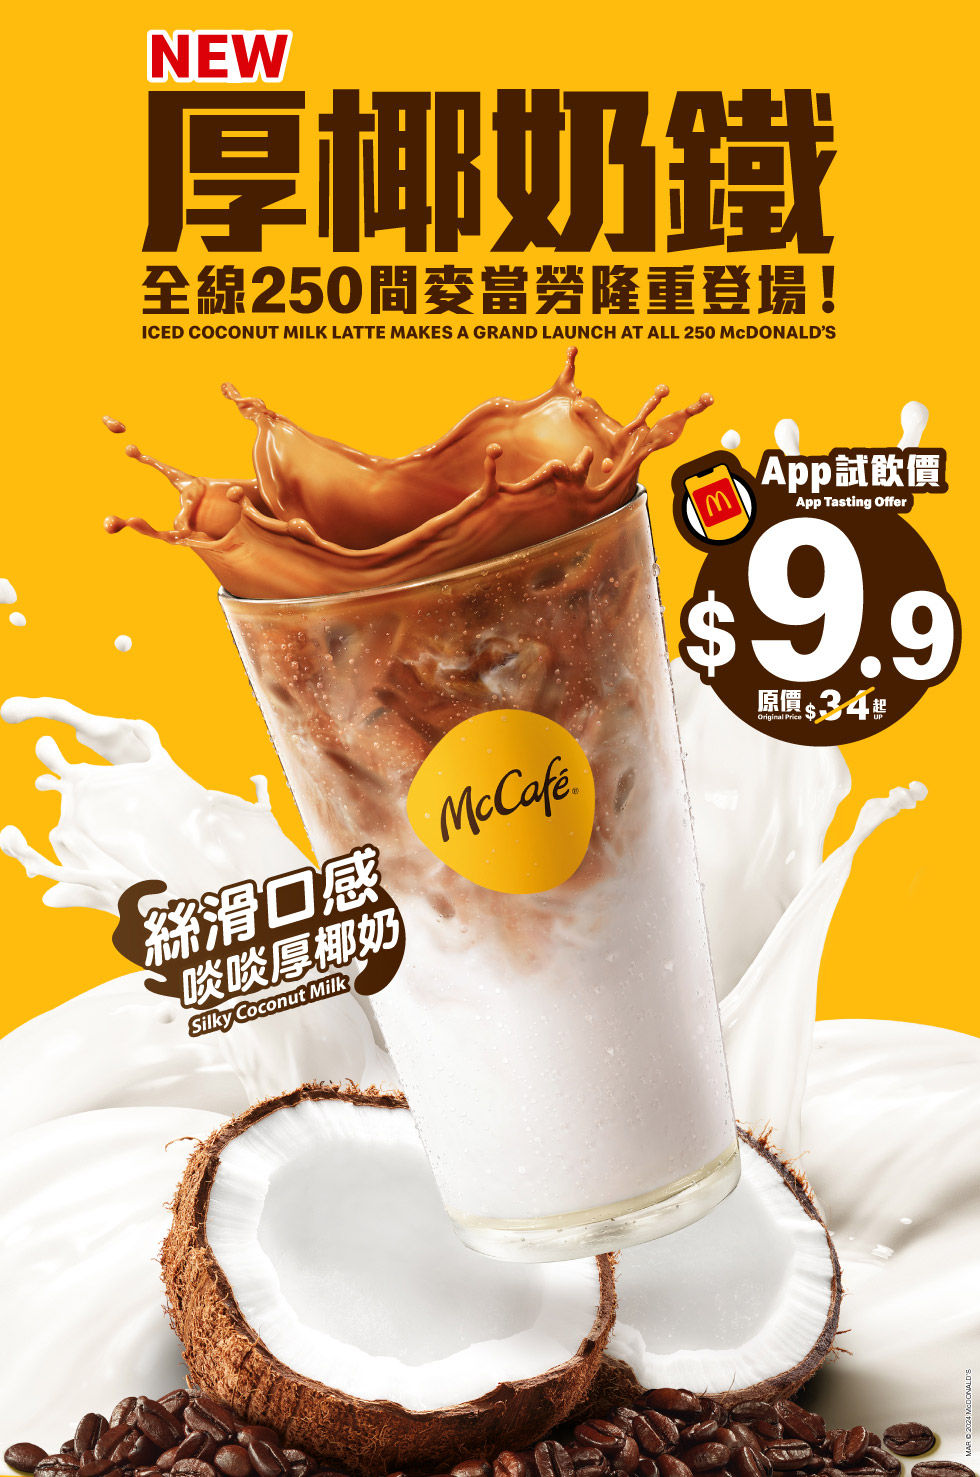 Iced Coconut Milk Latte Makes a Grand Launch At all 250 McDonald’s